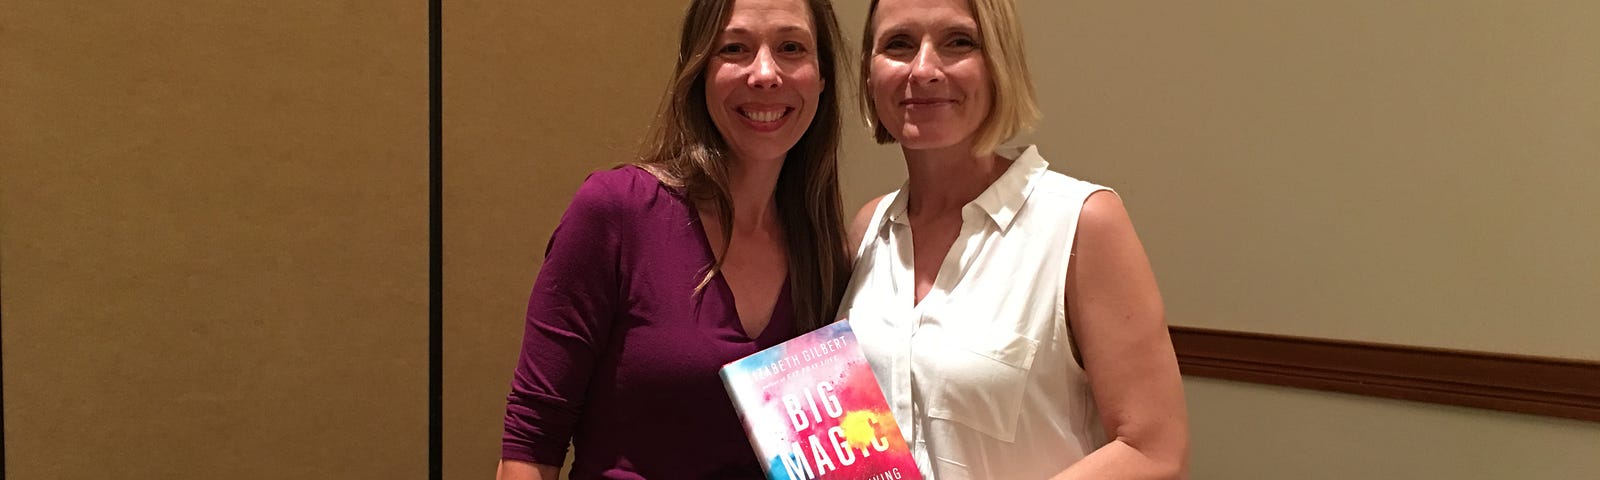 The author and Elizabeth Gilbert. Elizabeth Gilbert is holding her book Big Magic.